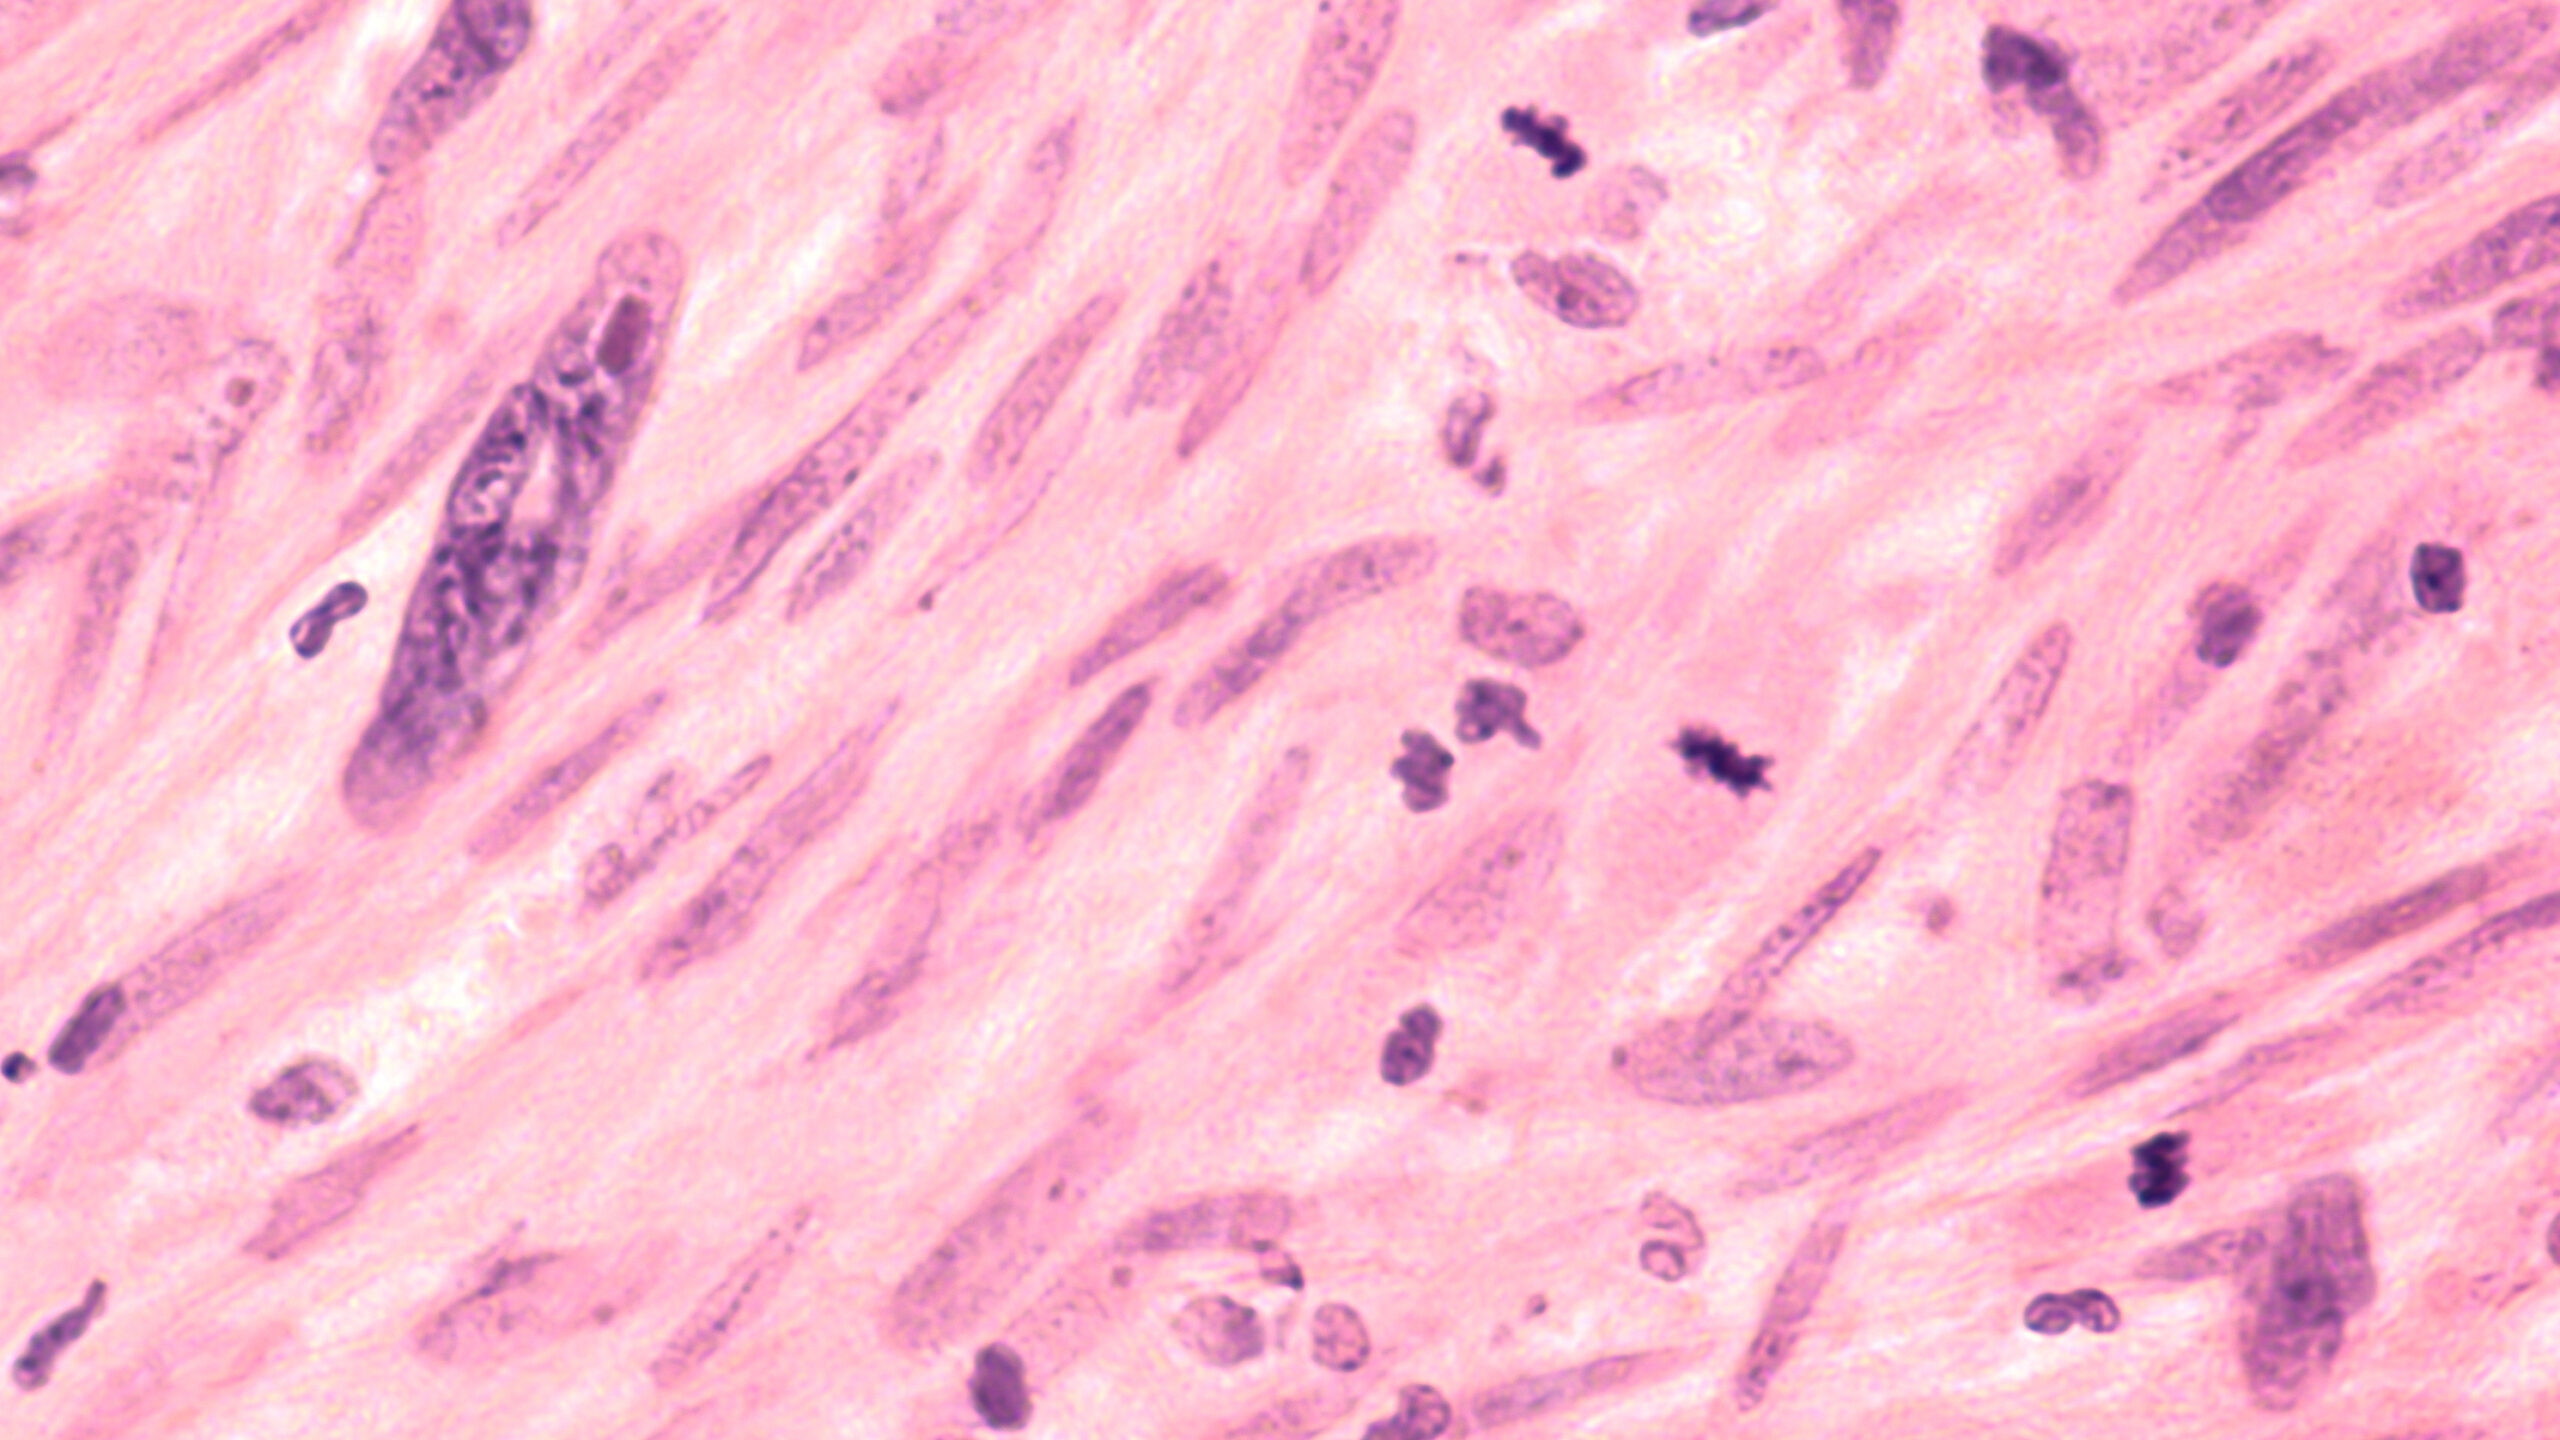 Microscopic image of a leiomyosarcoma, a type of soft tissue sarcoma of smooth muscle.  This malignant tumor typically occurs in the uterus or GI tract, but can occur from blood vessels elsewhere.